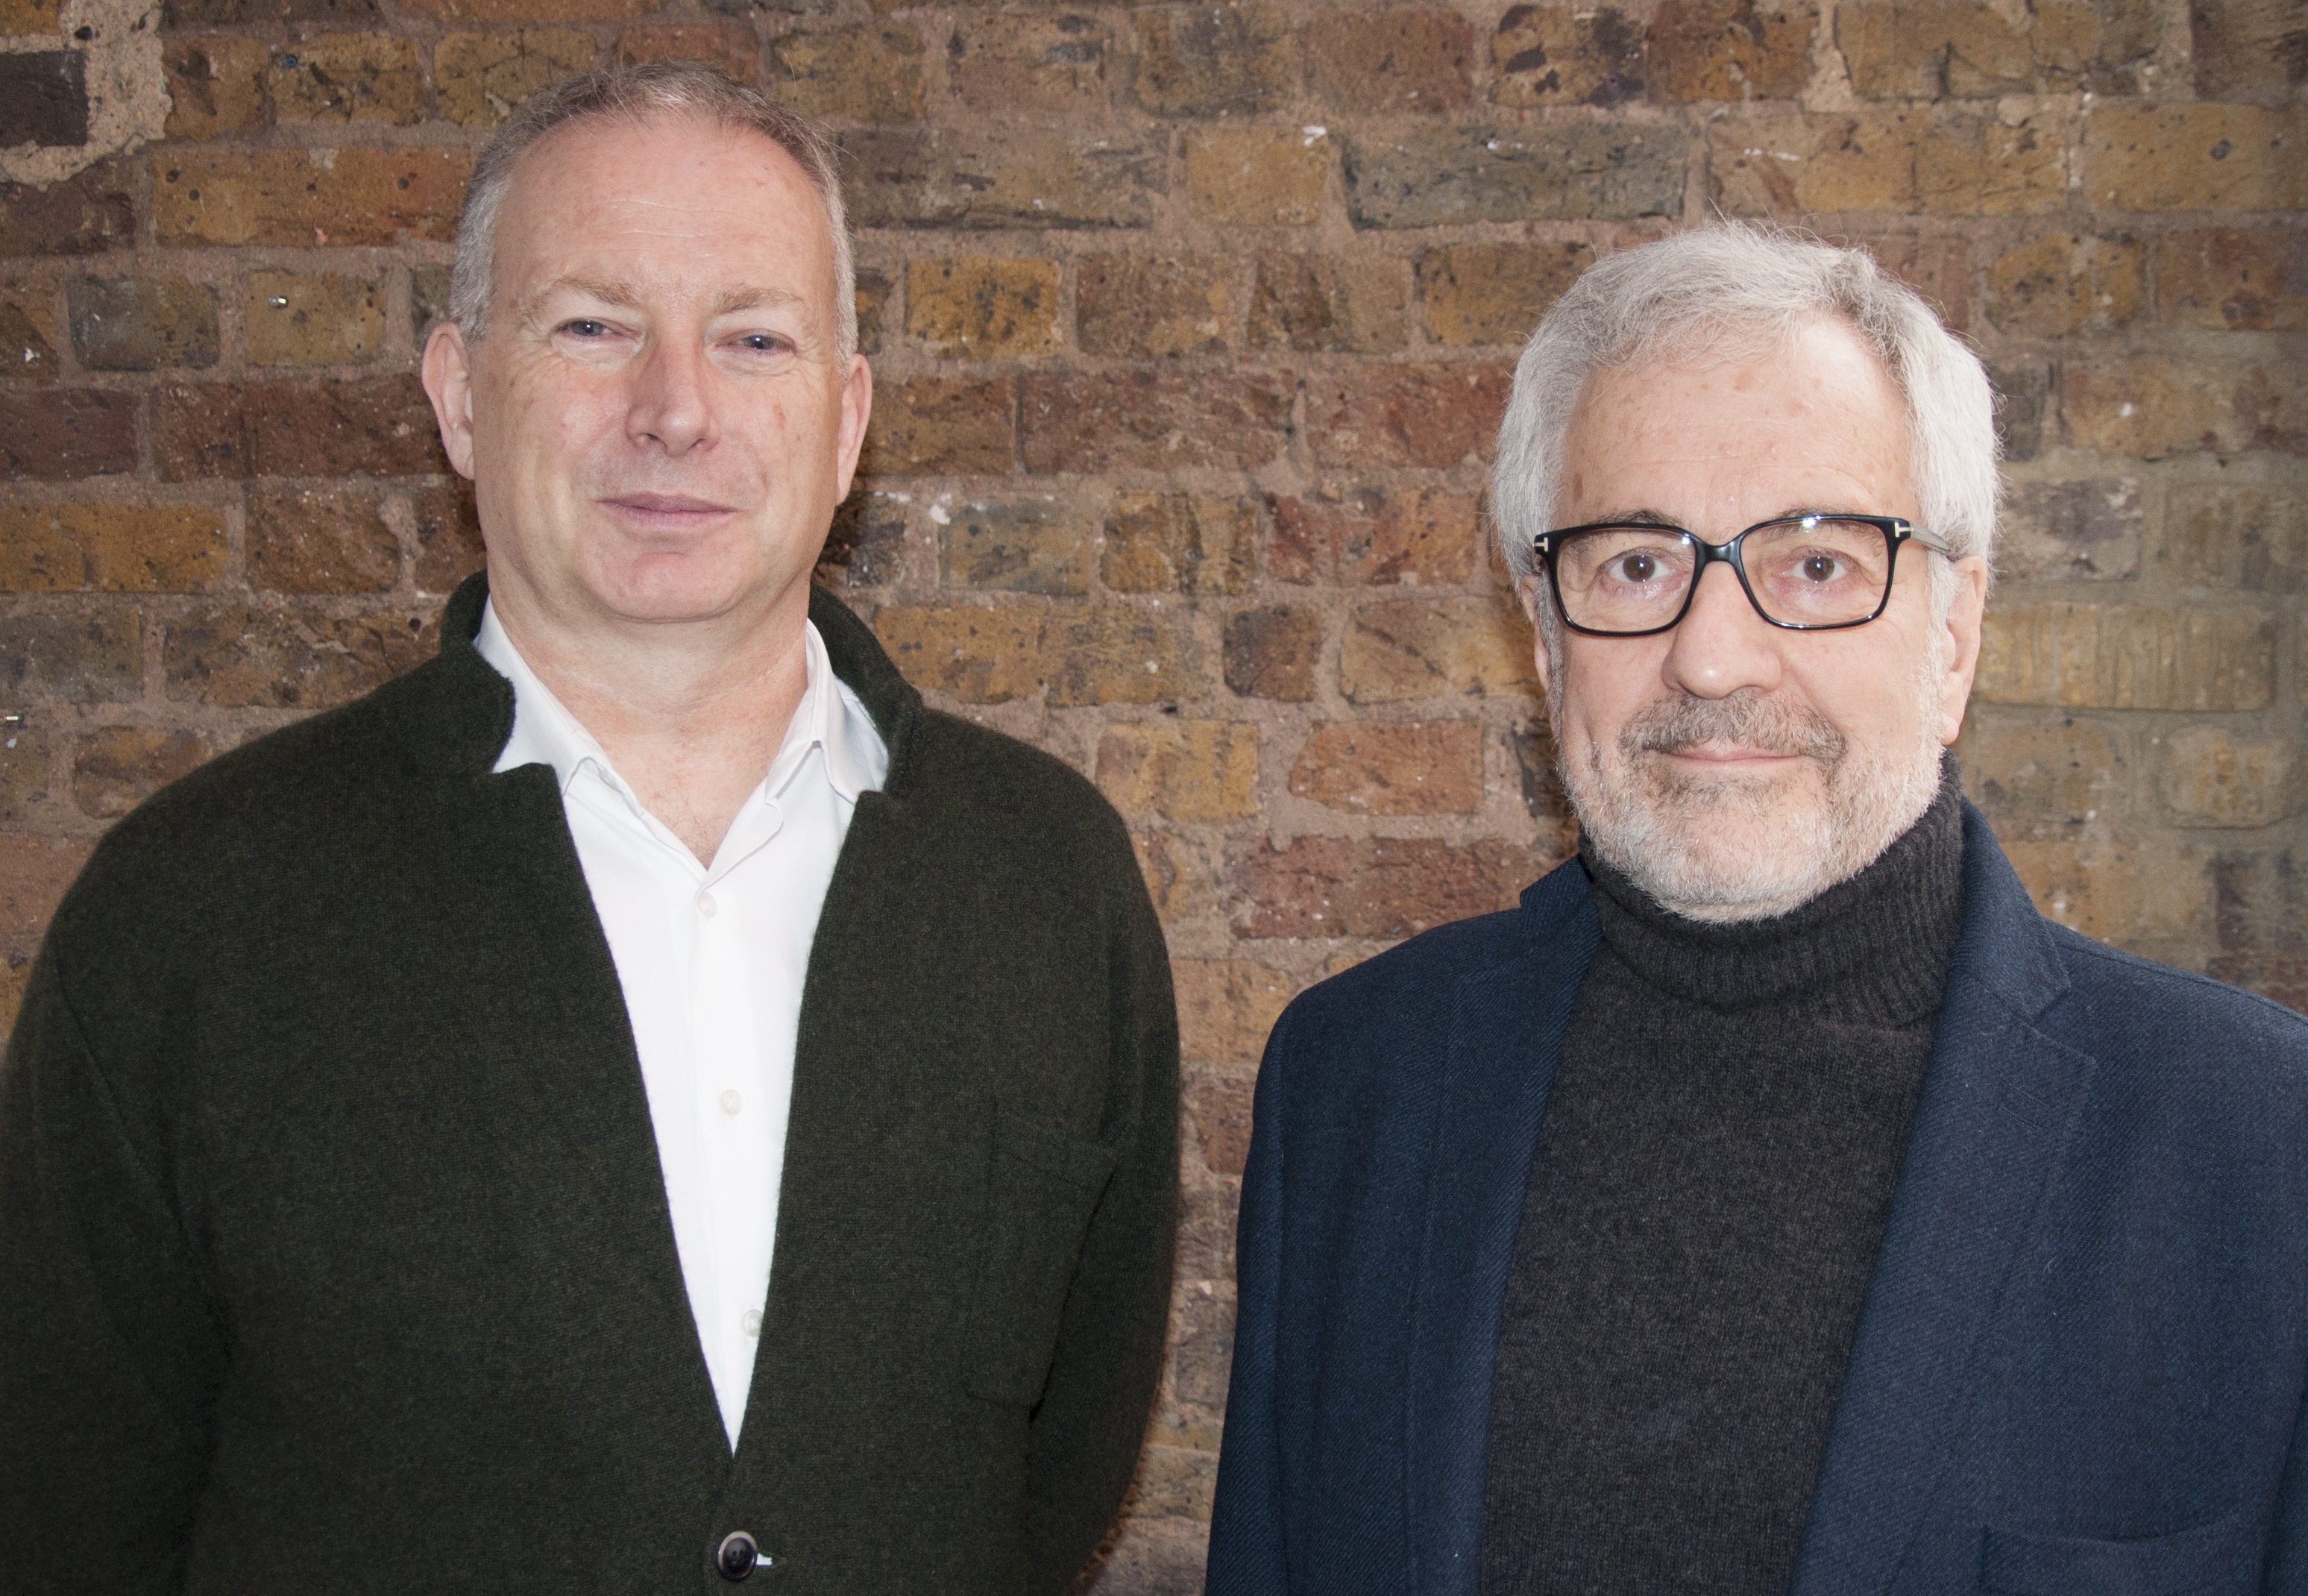 Breaking: Classical PR joins up with the big guys